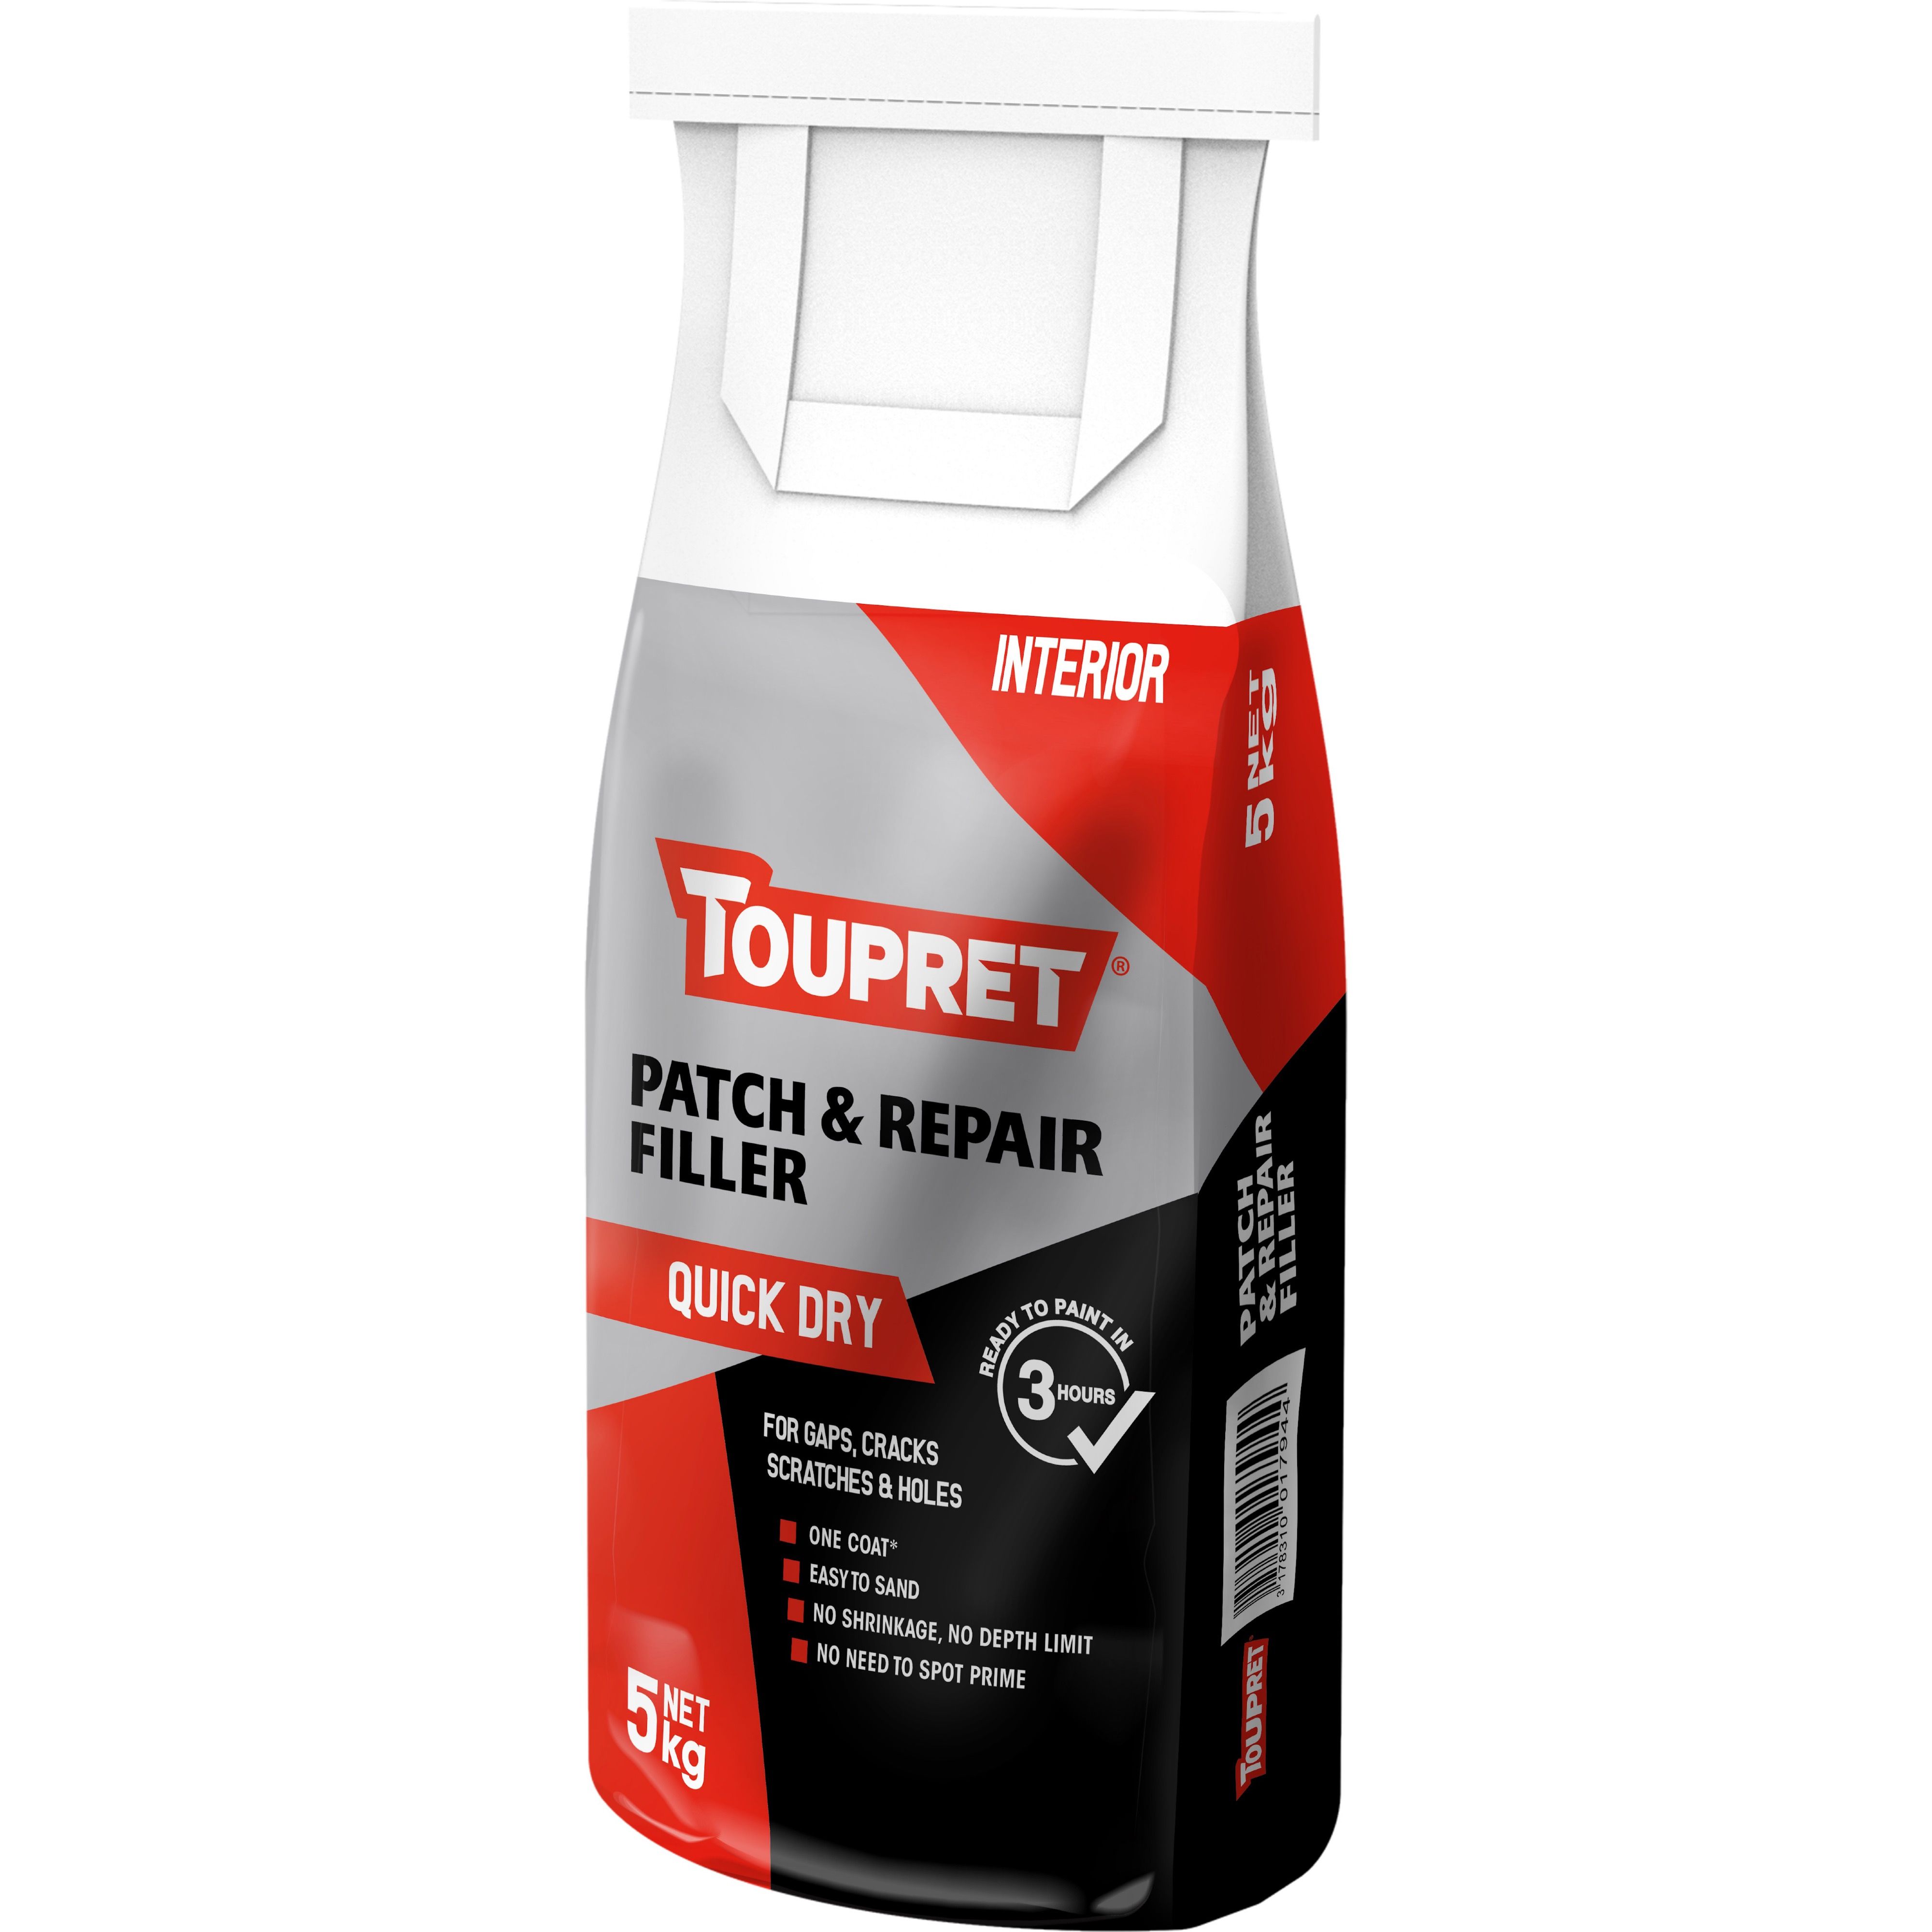 Toupret Patch and Repair Quick Dry 5kg